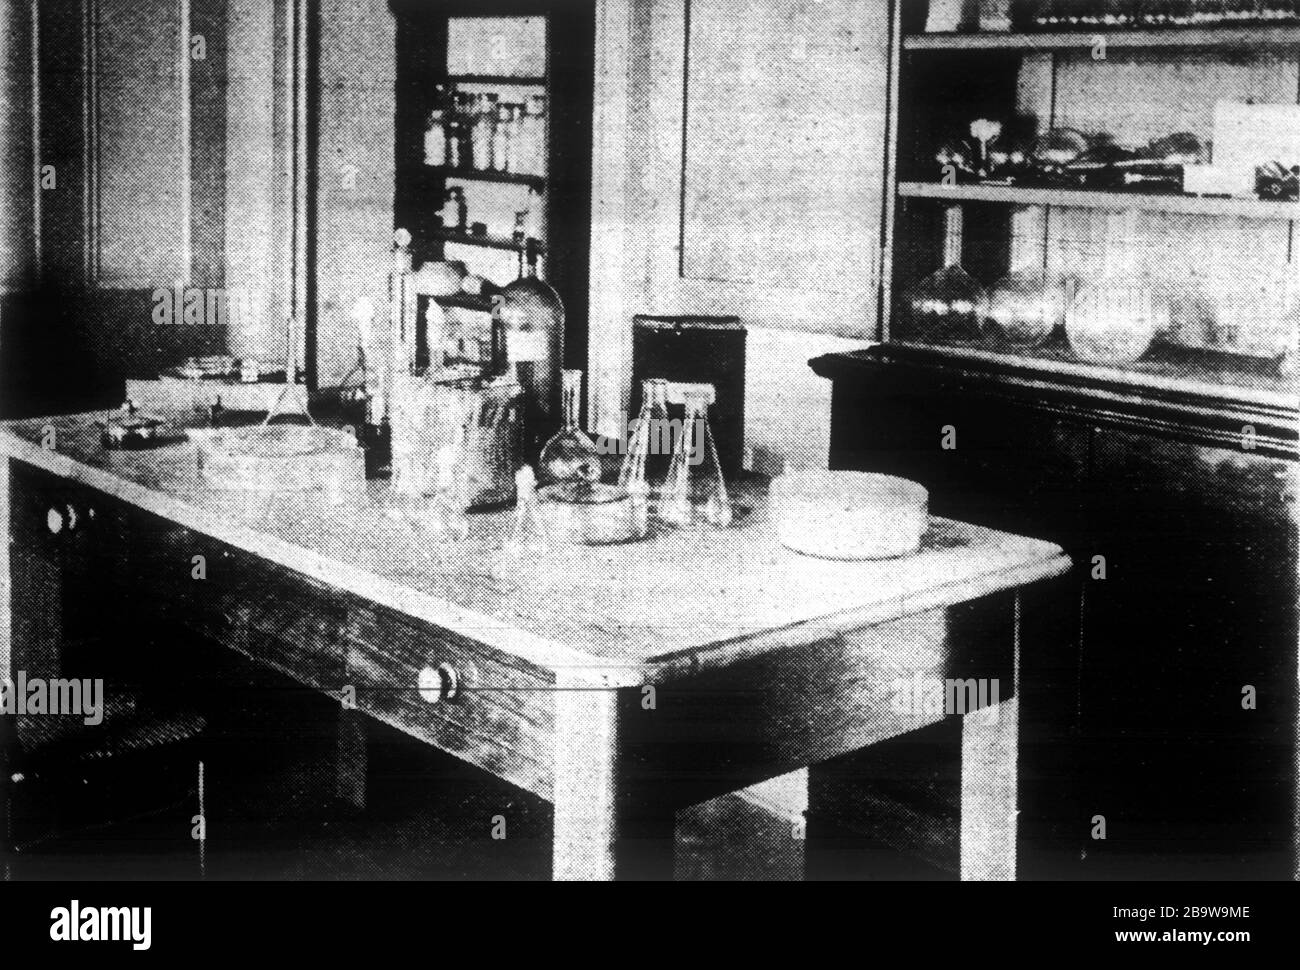 'English: Laboratory at the Queensland Stock Institute at Normanby Hill, Brisbane, Queensland, appearing in the The Queenslander newspaper for an article describing the new premises. Source Caption: IN THE LABORATORY.; 1900; The Queenslander (17 February 1900). The Stock Institute. The New Building. p. 312. Note: Associated article appears on p. 313.; Unknown author; ' Stock Photo